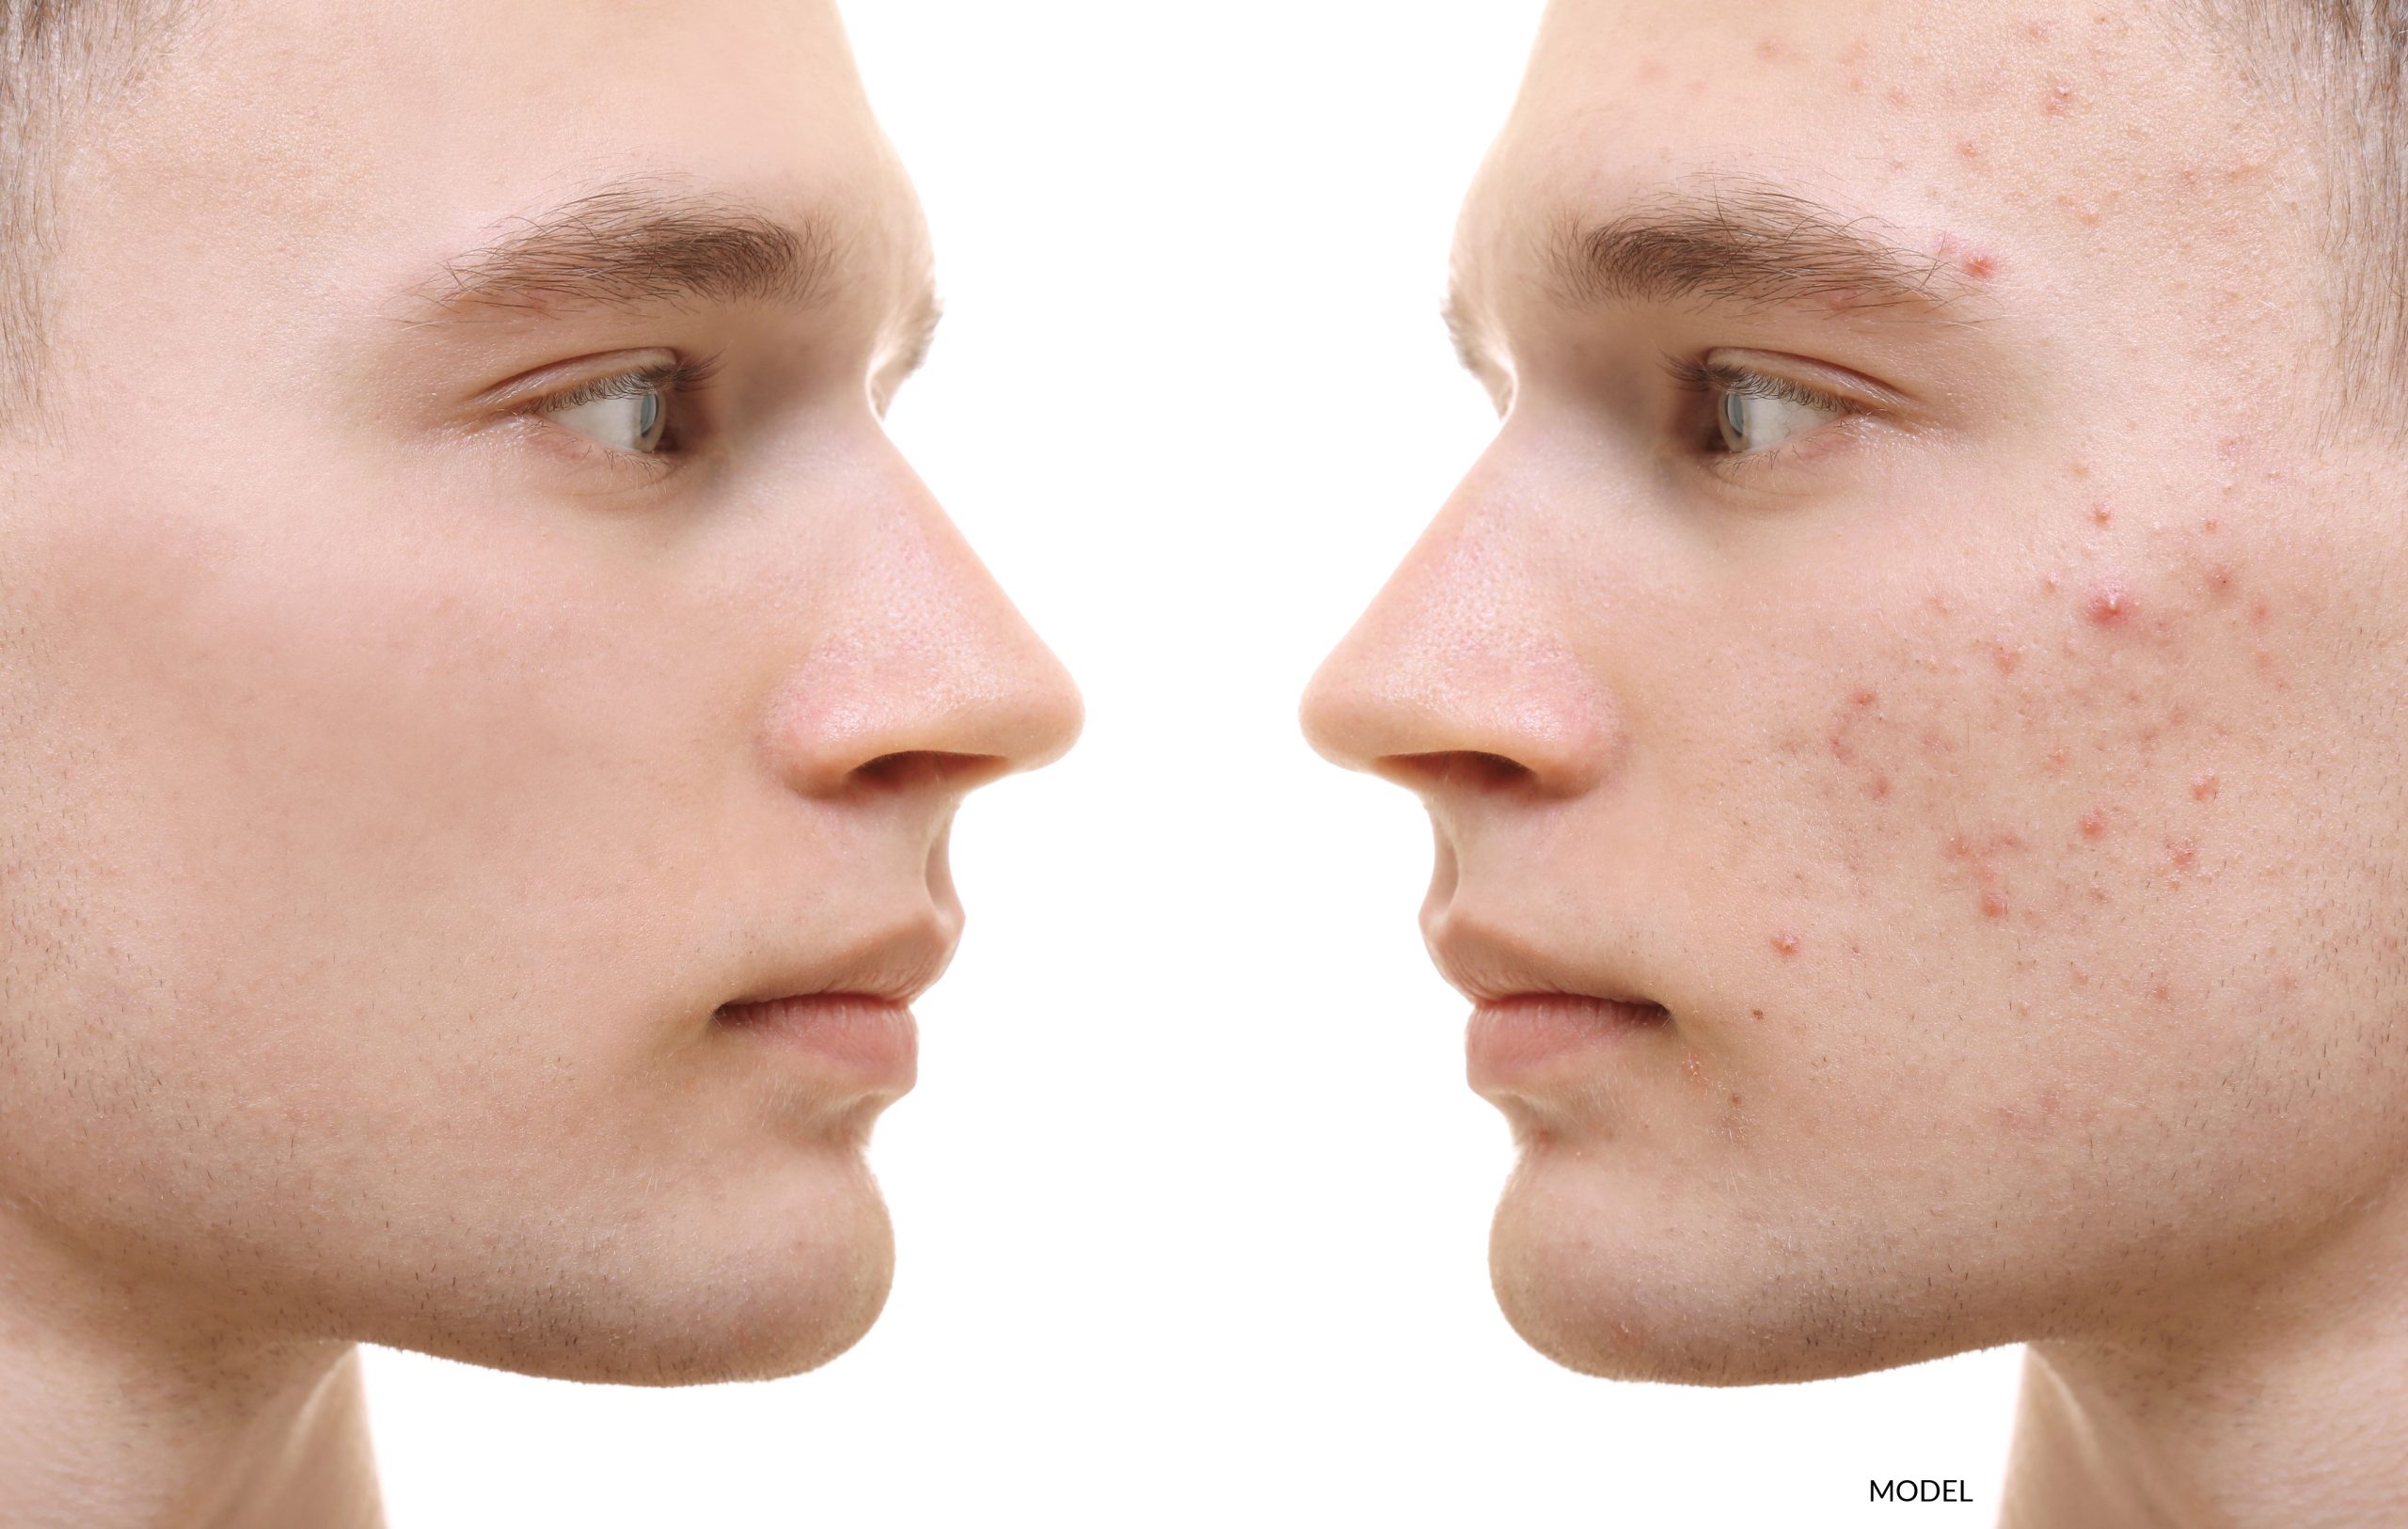 A young man before and after acne treatment.